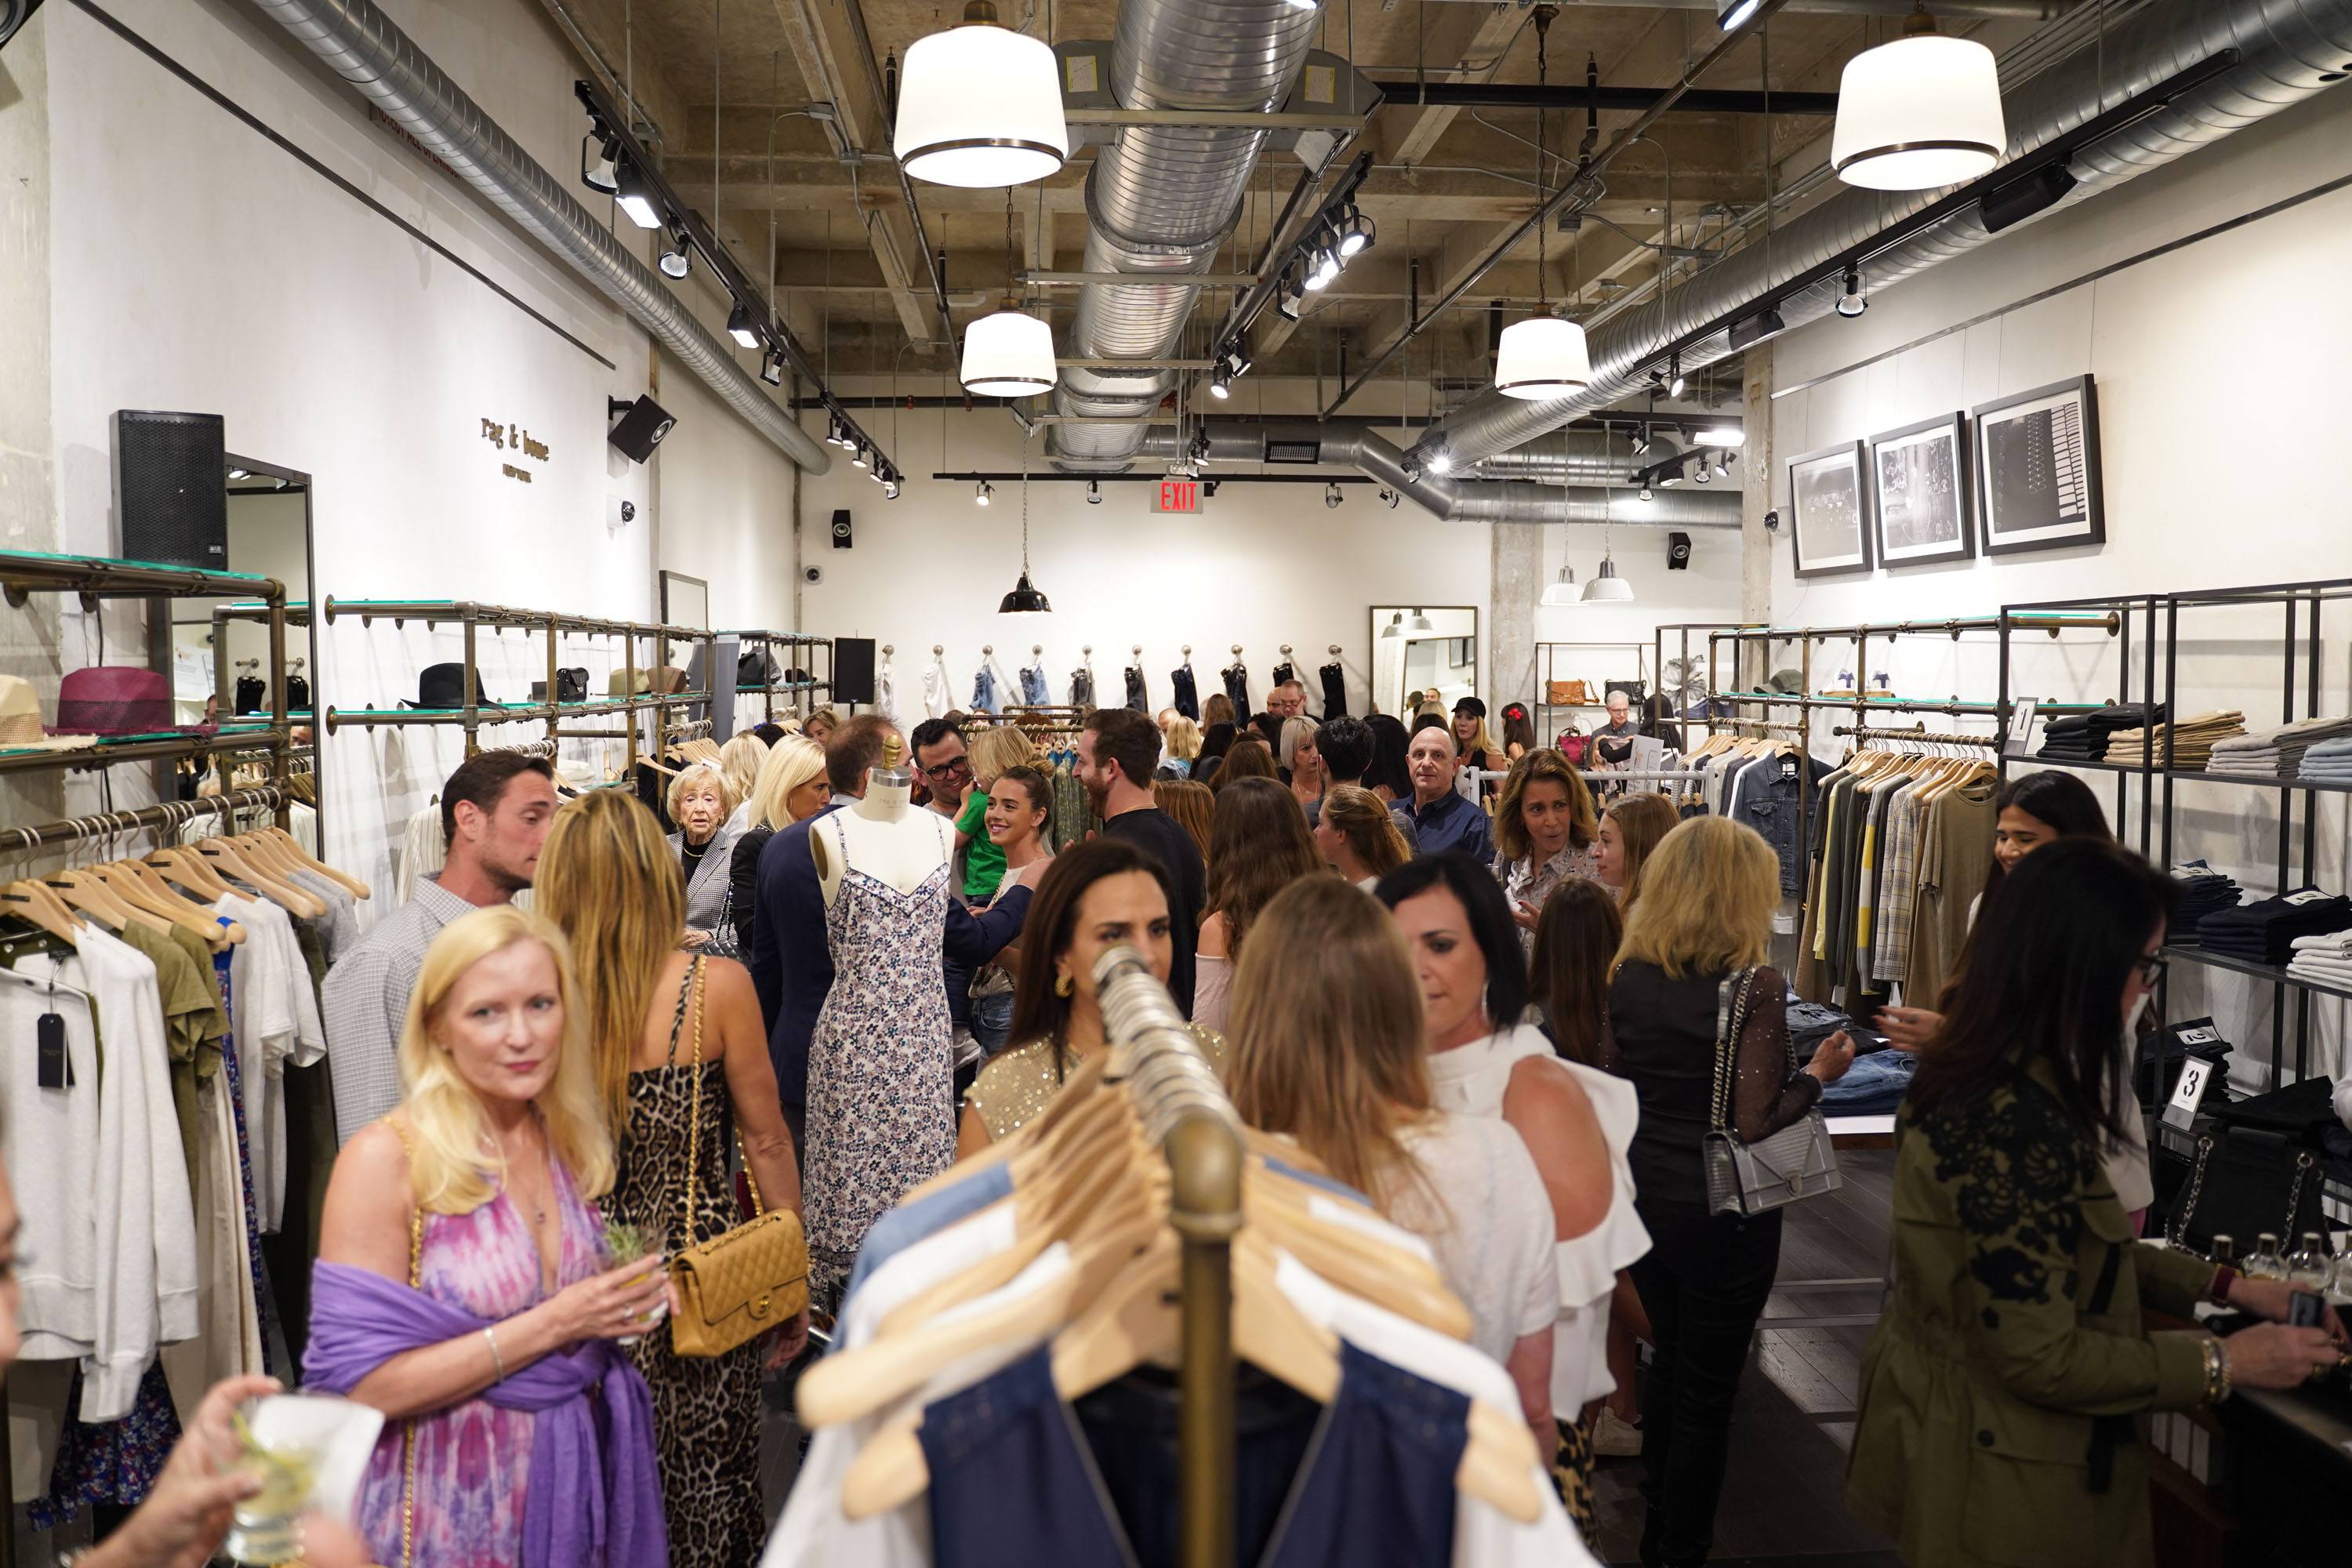 Ambiance image of guests at Rag & Bone Bal Harbour enjoying the fundraiser for The Childhood Cancer Project